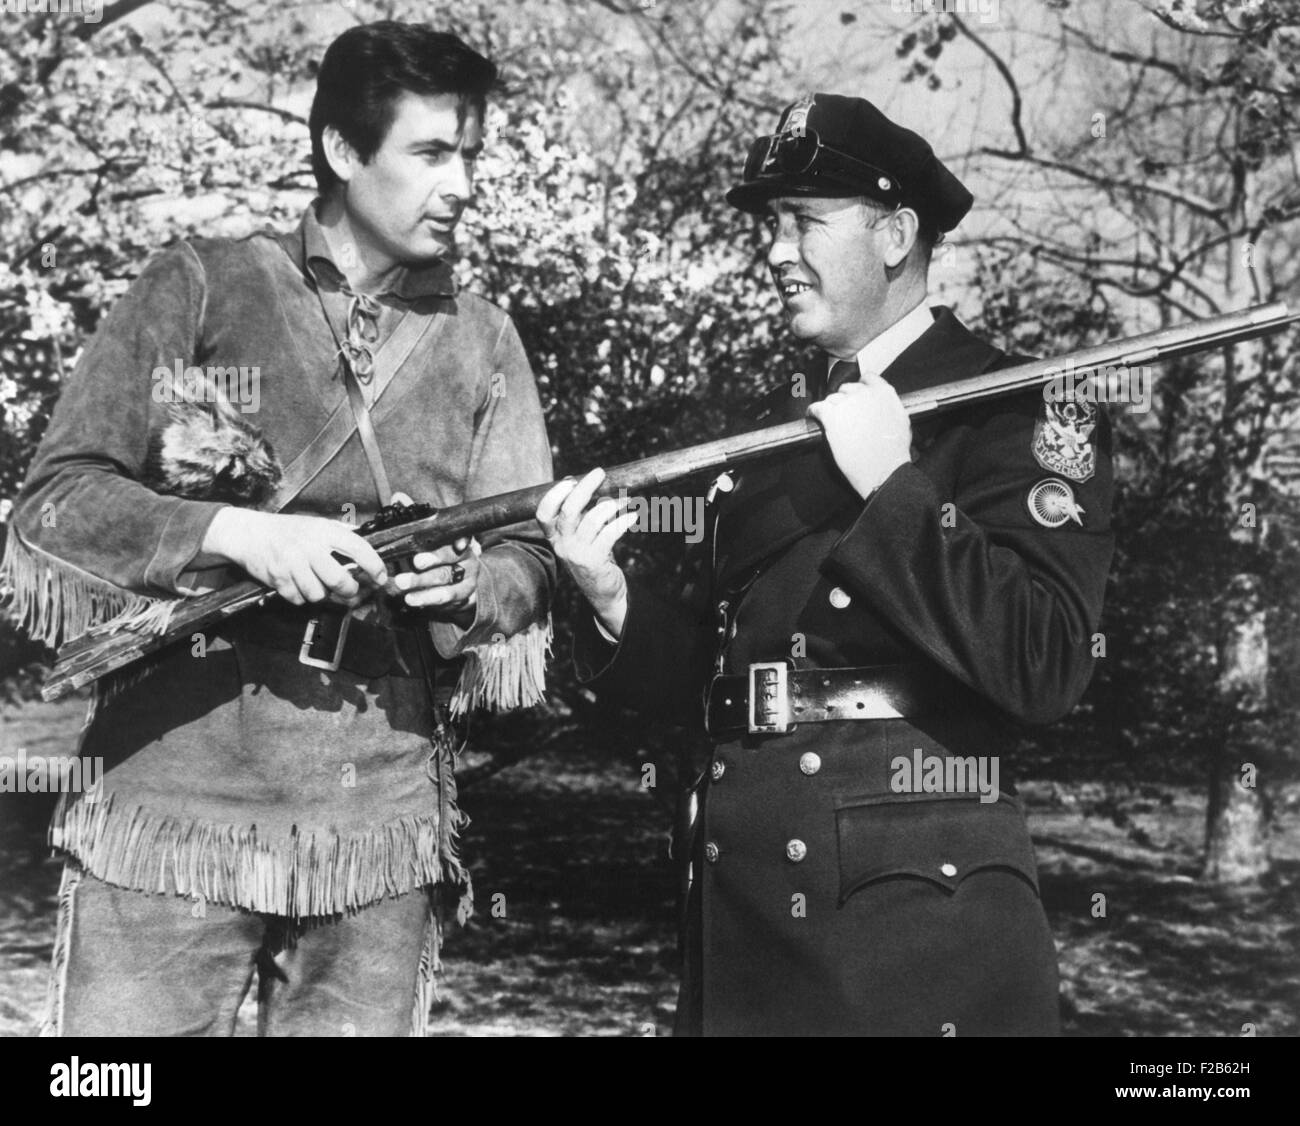 Actor Fess Parker in the frontier costume of Davy Crocket with a White House policeman. Parker starred in the Disney film and TV series, 'Davy Crockett, King of the Wild Frontier'. Ca. April 1955. - (BSLOC 2014 16 163) Stock Photo